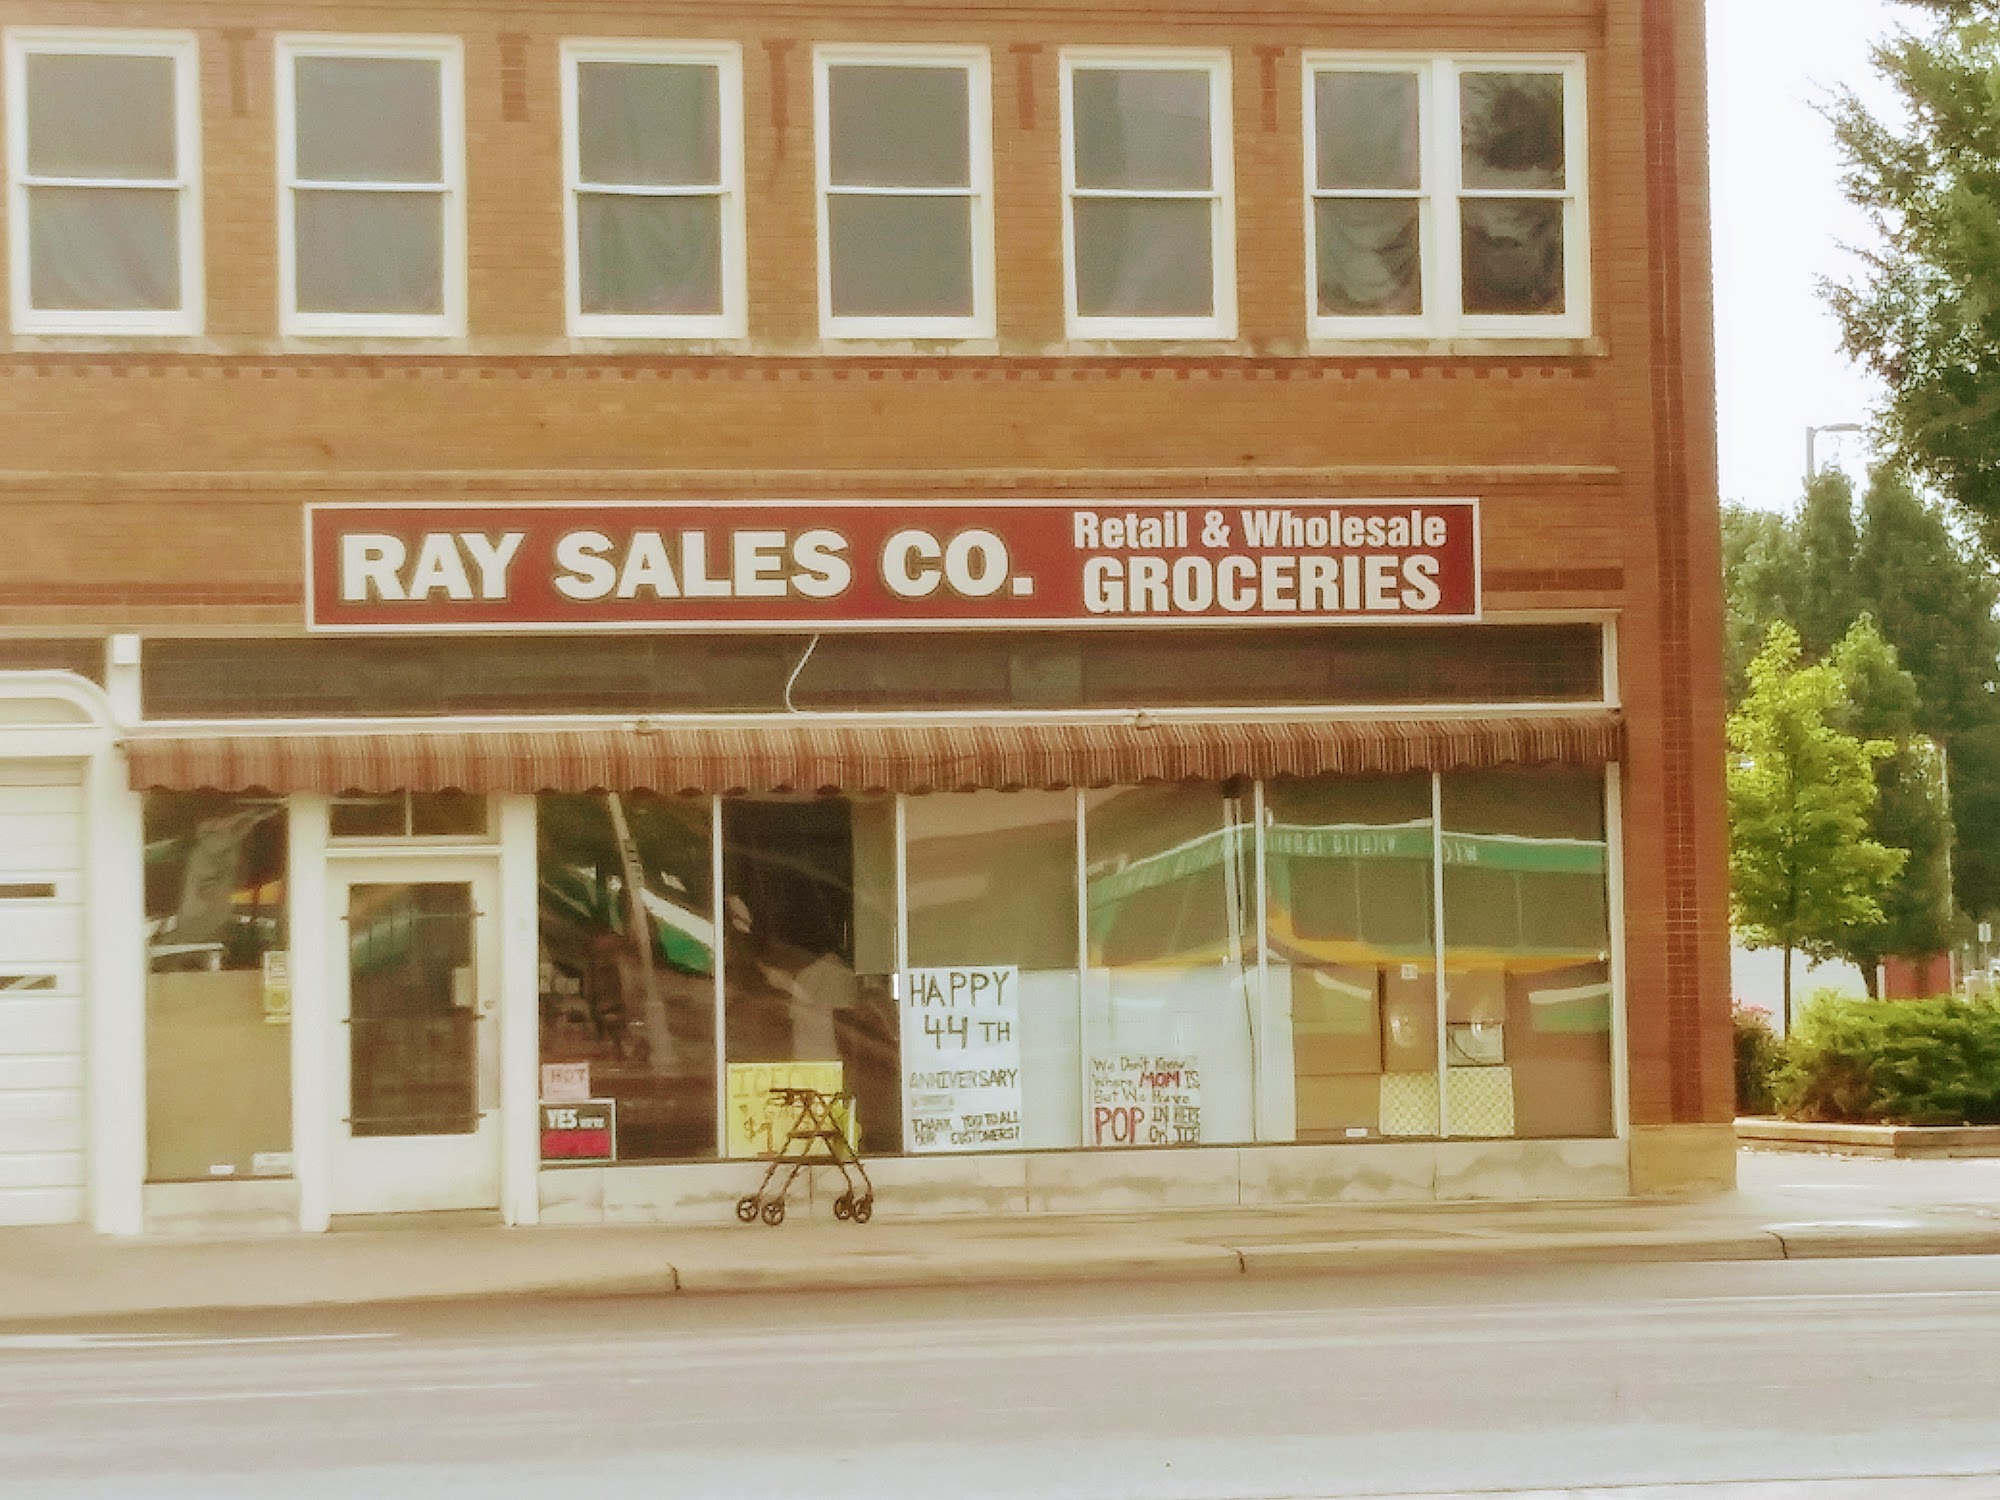 Ray Sales Co